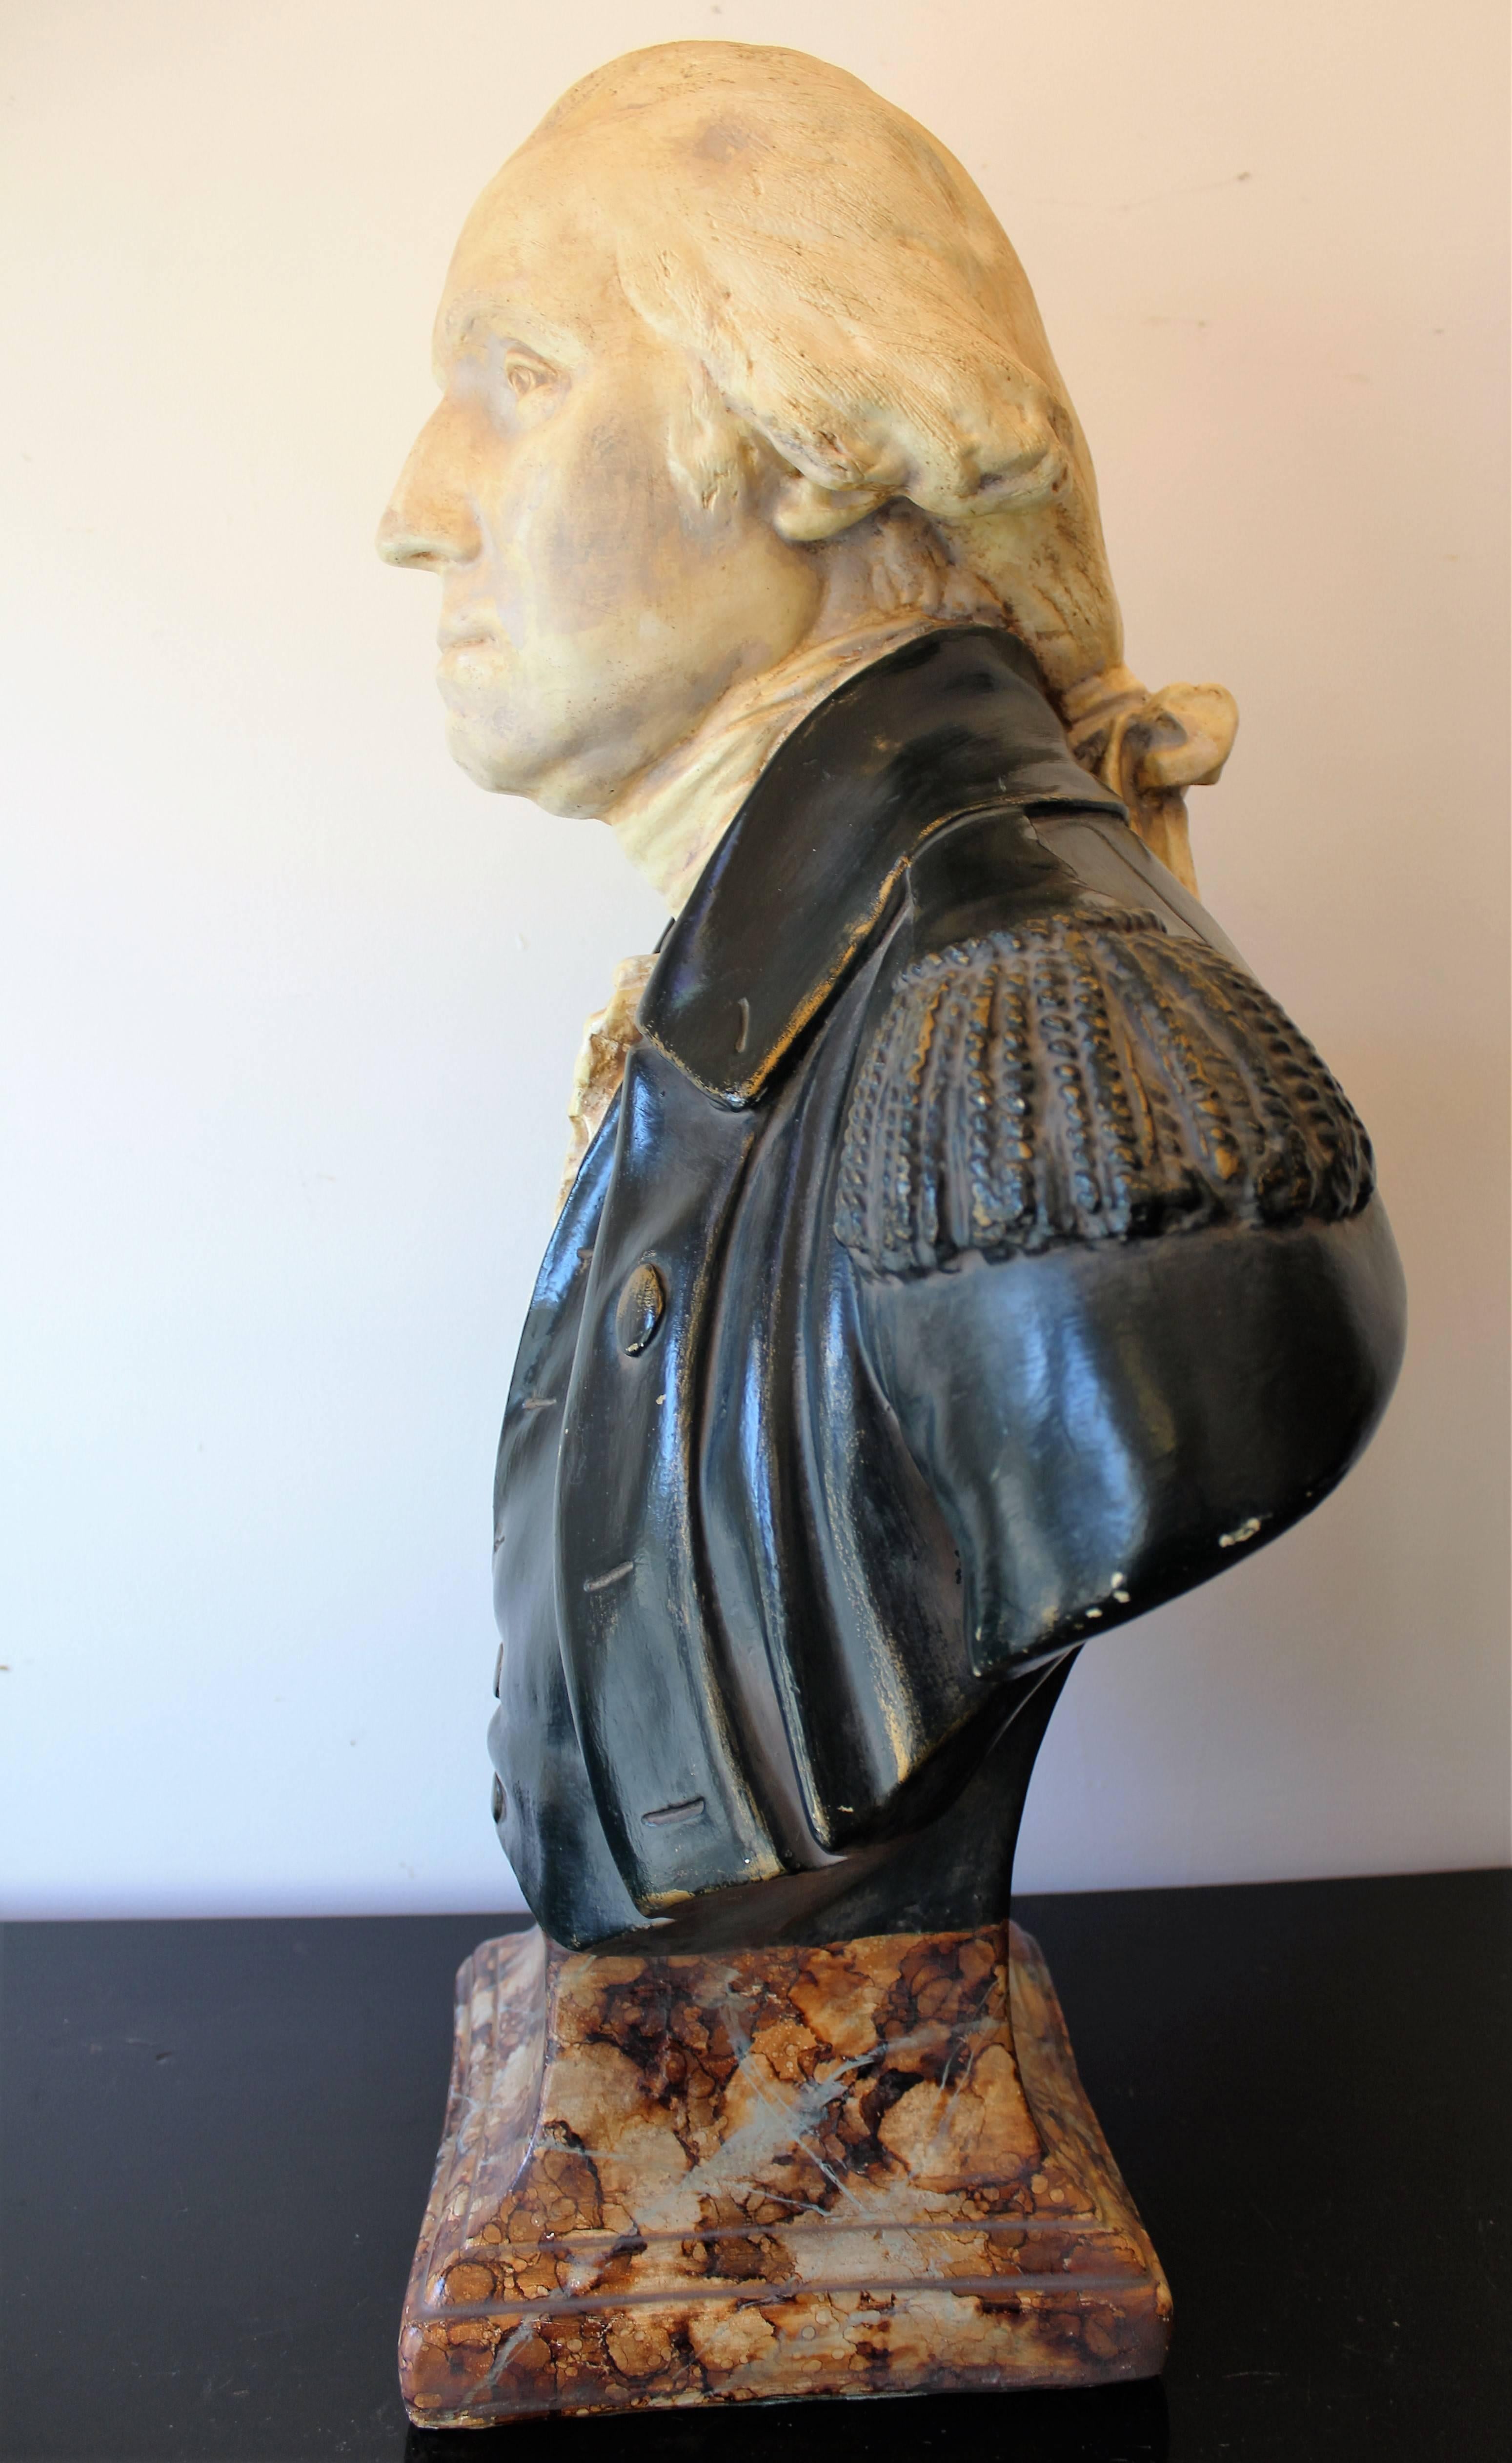 19th century plaster bust of George Washington after French sculptor Jean-Antoine Houdon. The original sculpture from the late 18th century was based on a life mask and other measurements of George Washington taken by Houdon. It is considered one of